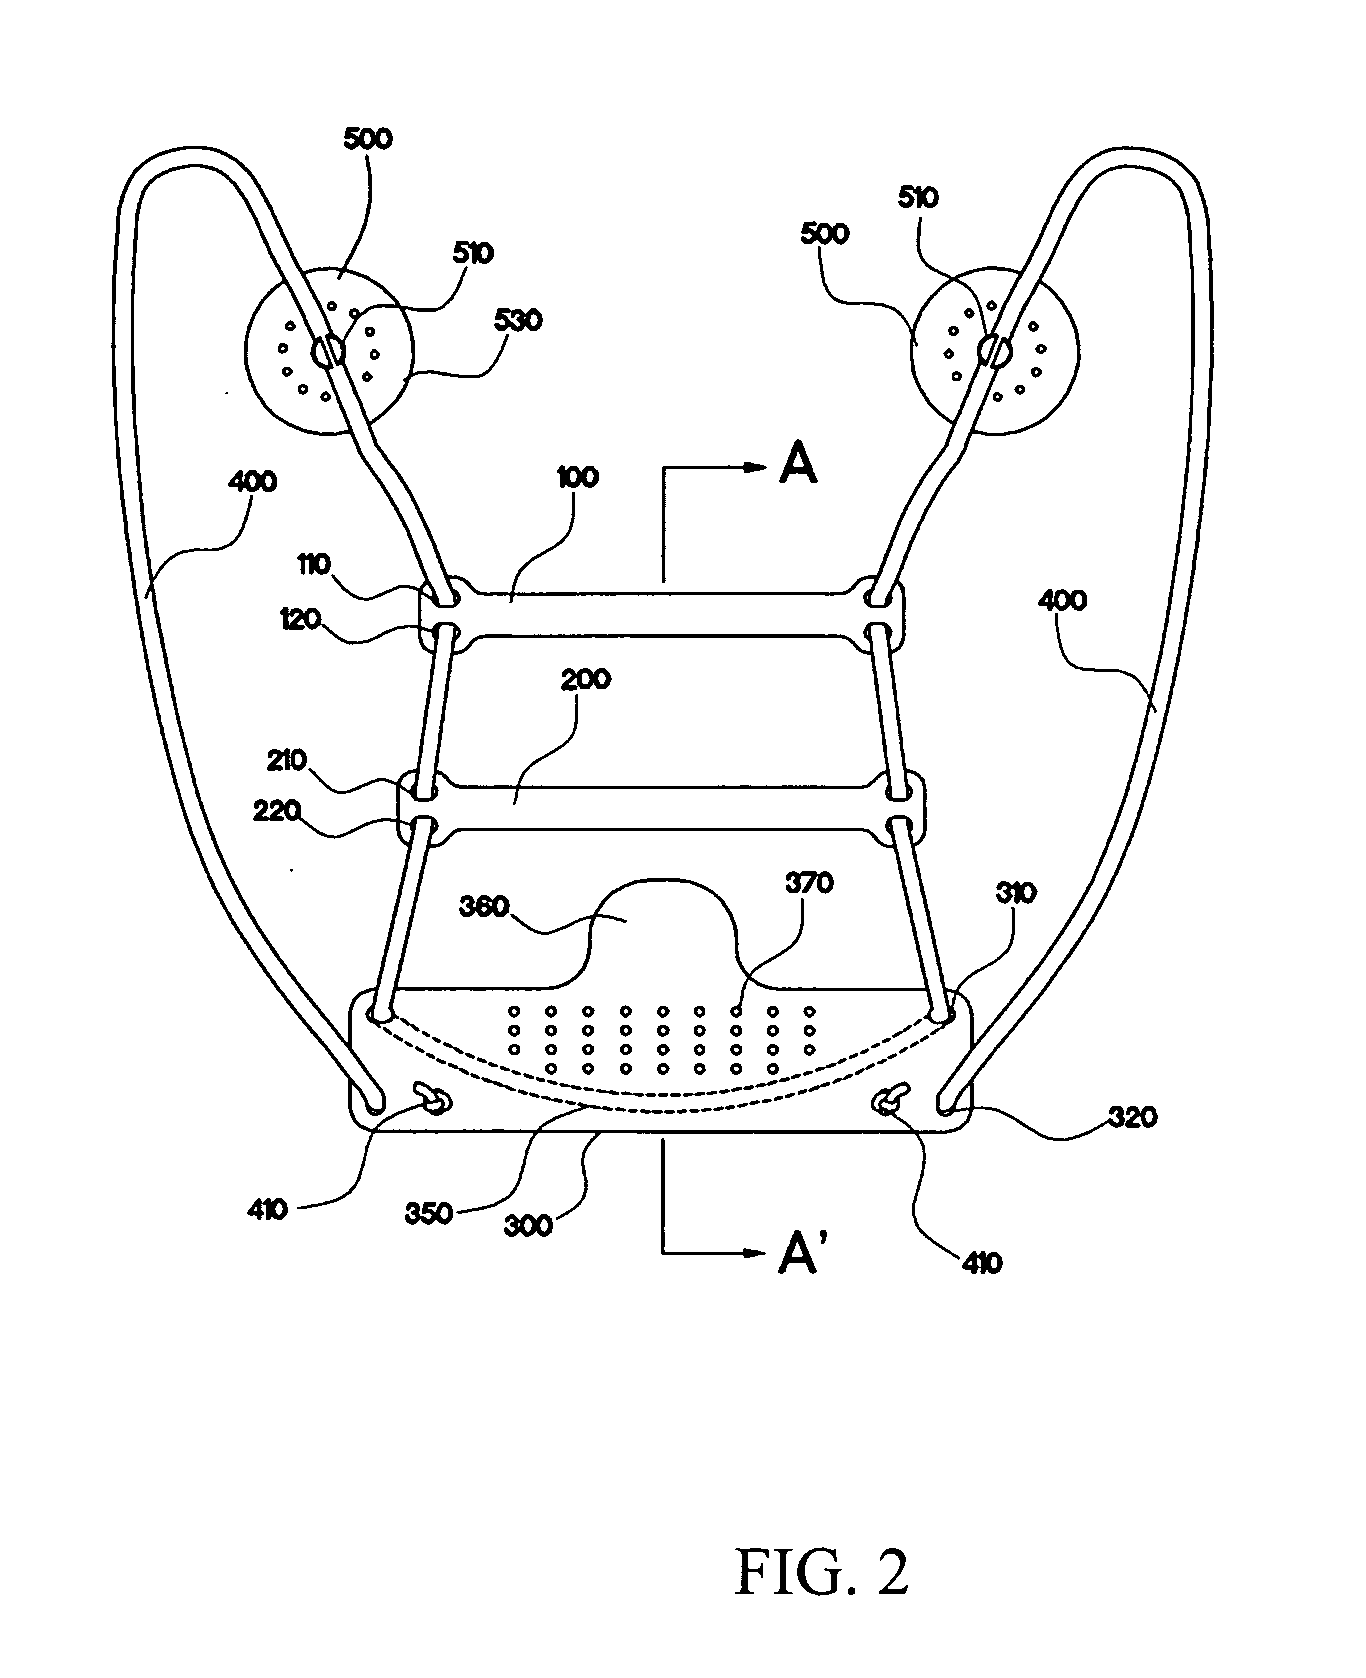 Device for preventing mouth opening during sleep